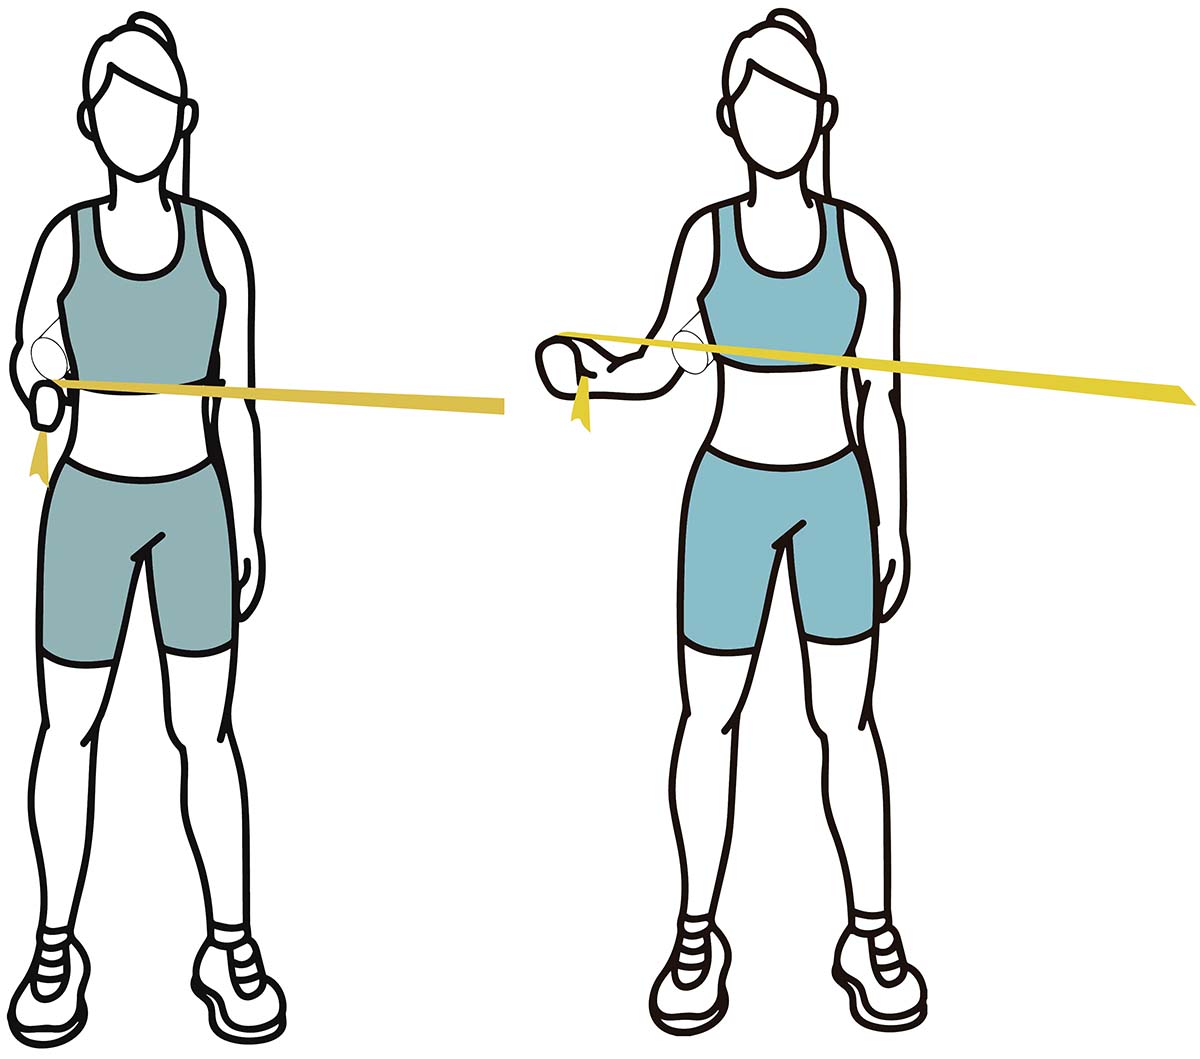 shoulder pulley exercises for physical therapy and rehab